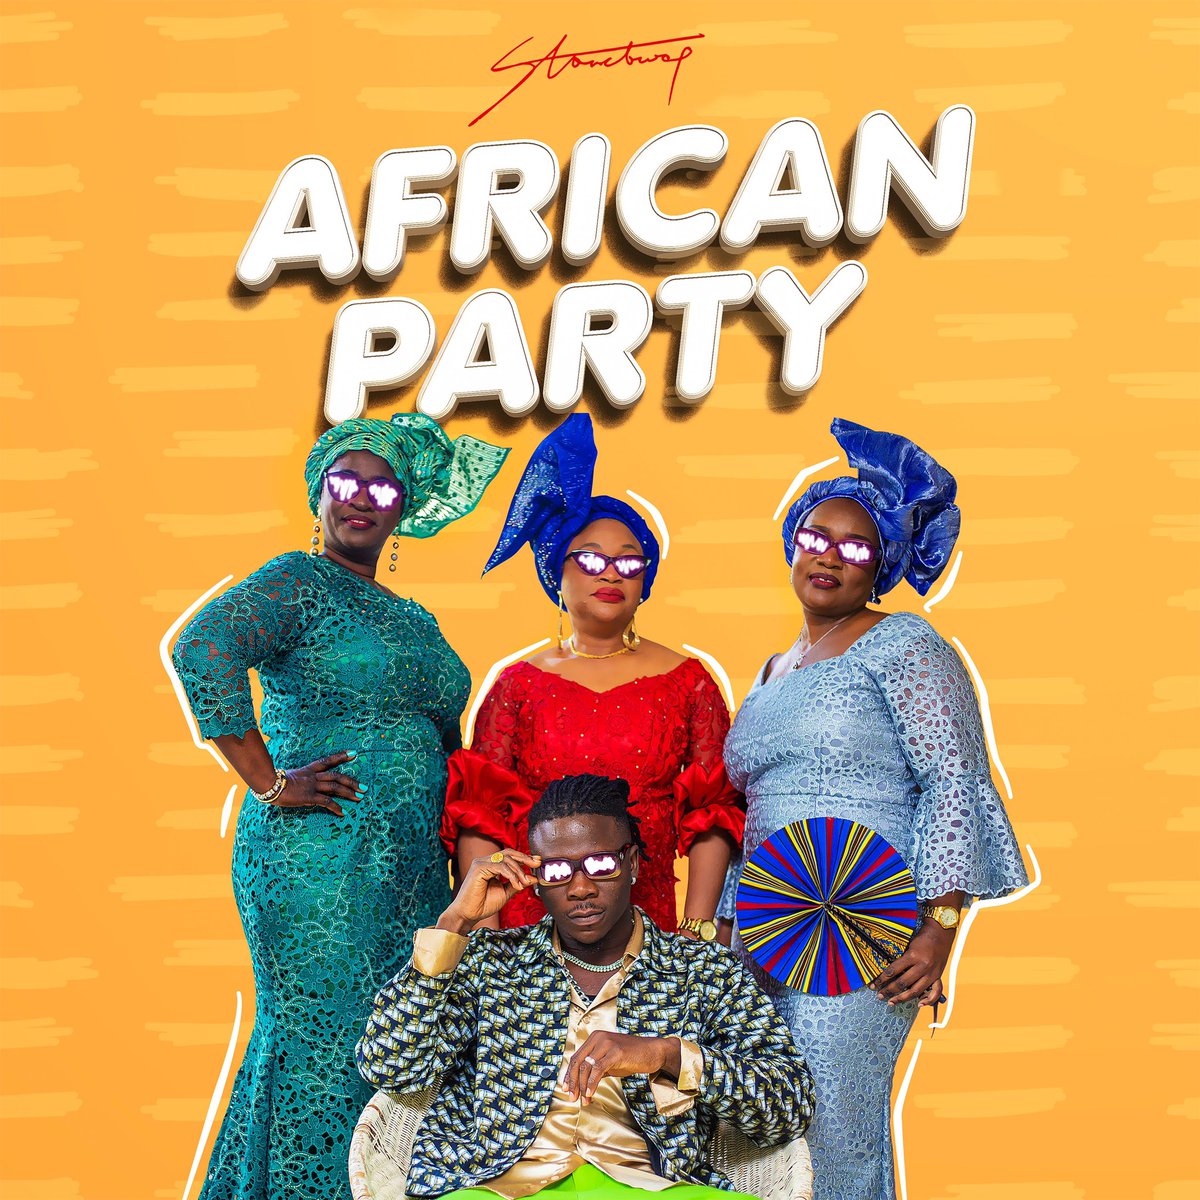 Happy Ghana Independence Day 🇬🇭 Let Africa Party With Us! #AfricanParty off #AnlogaJunction OUT NOW

Stream: kv-online-talent.lnk.to/SBAP